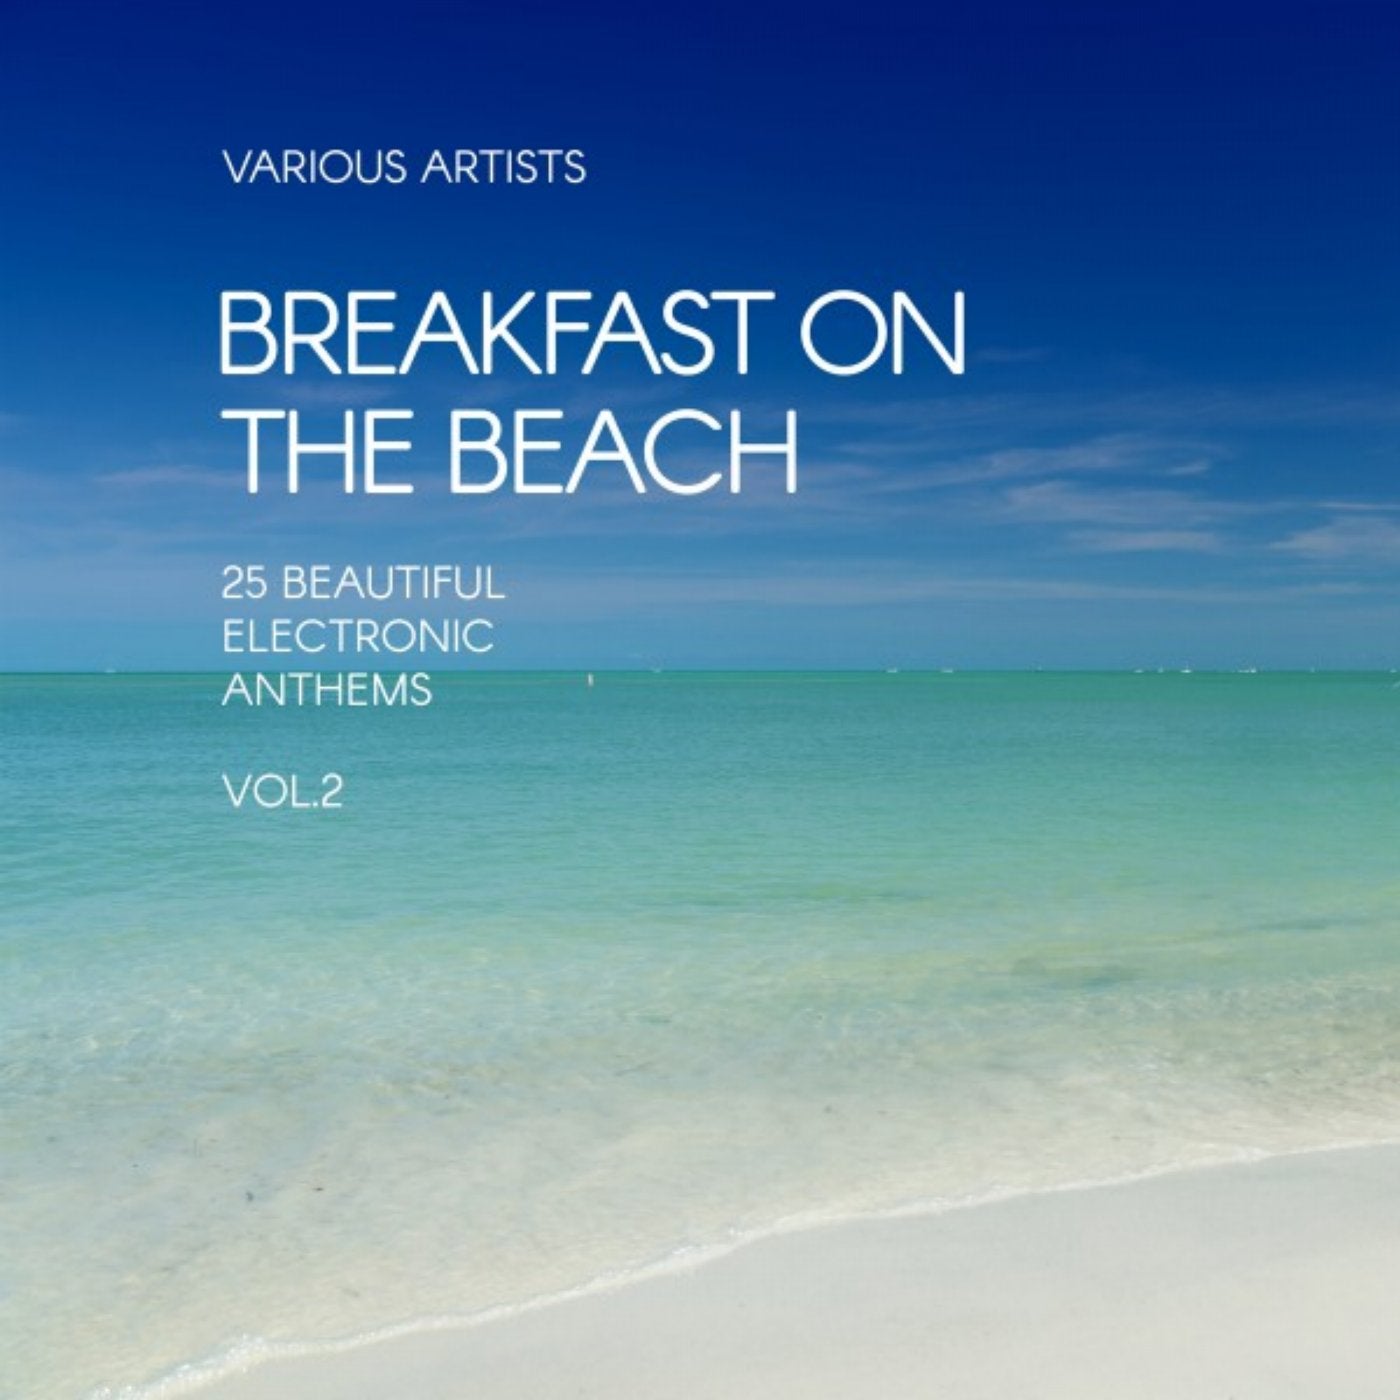 Breakfast on the Beach (25 Beautiful Electronic Anthems), Vol. 2